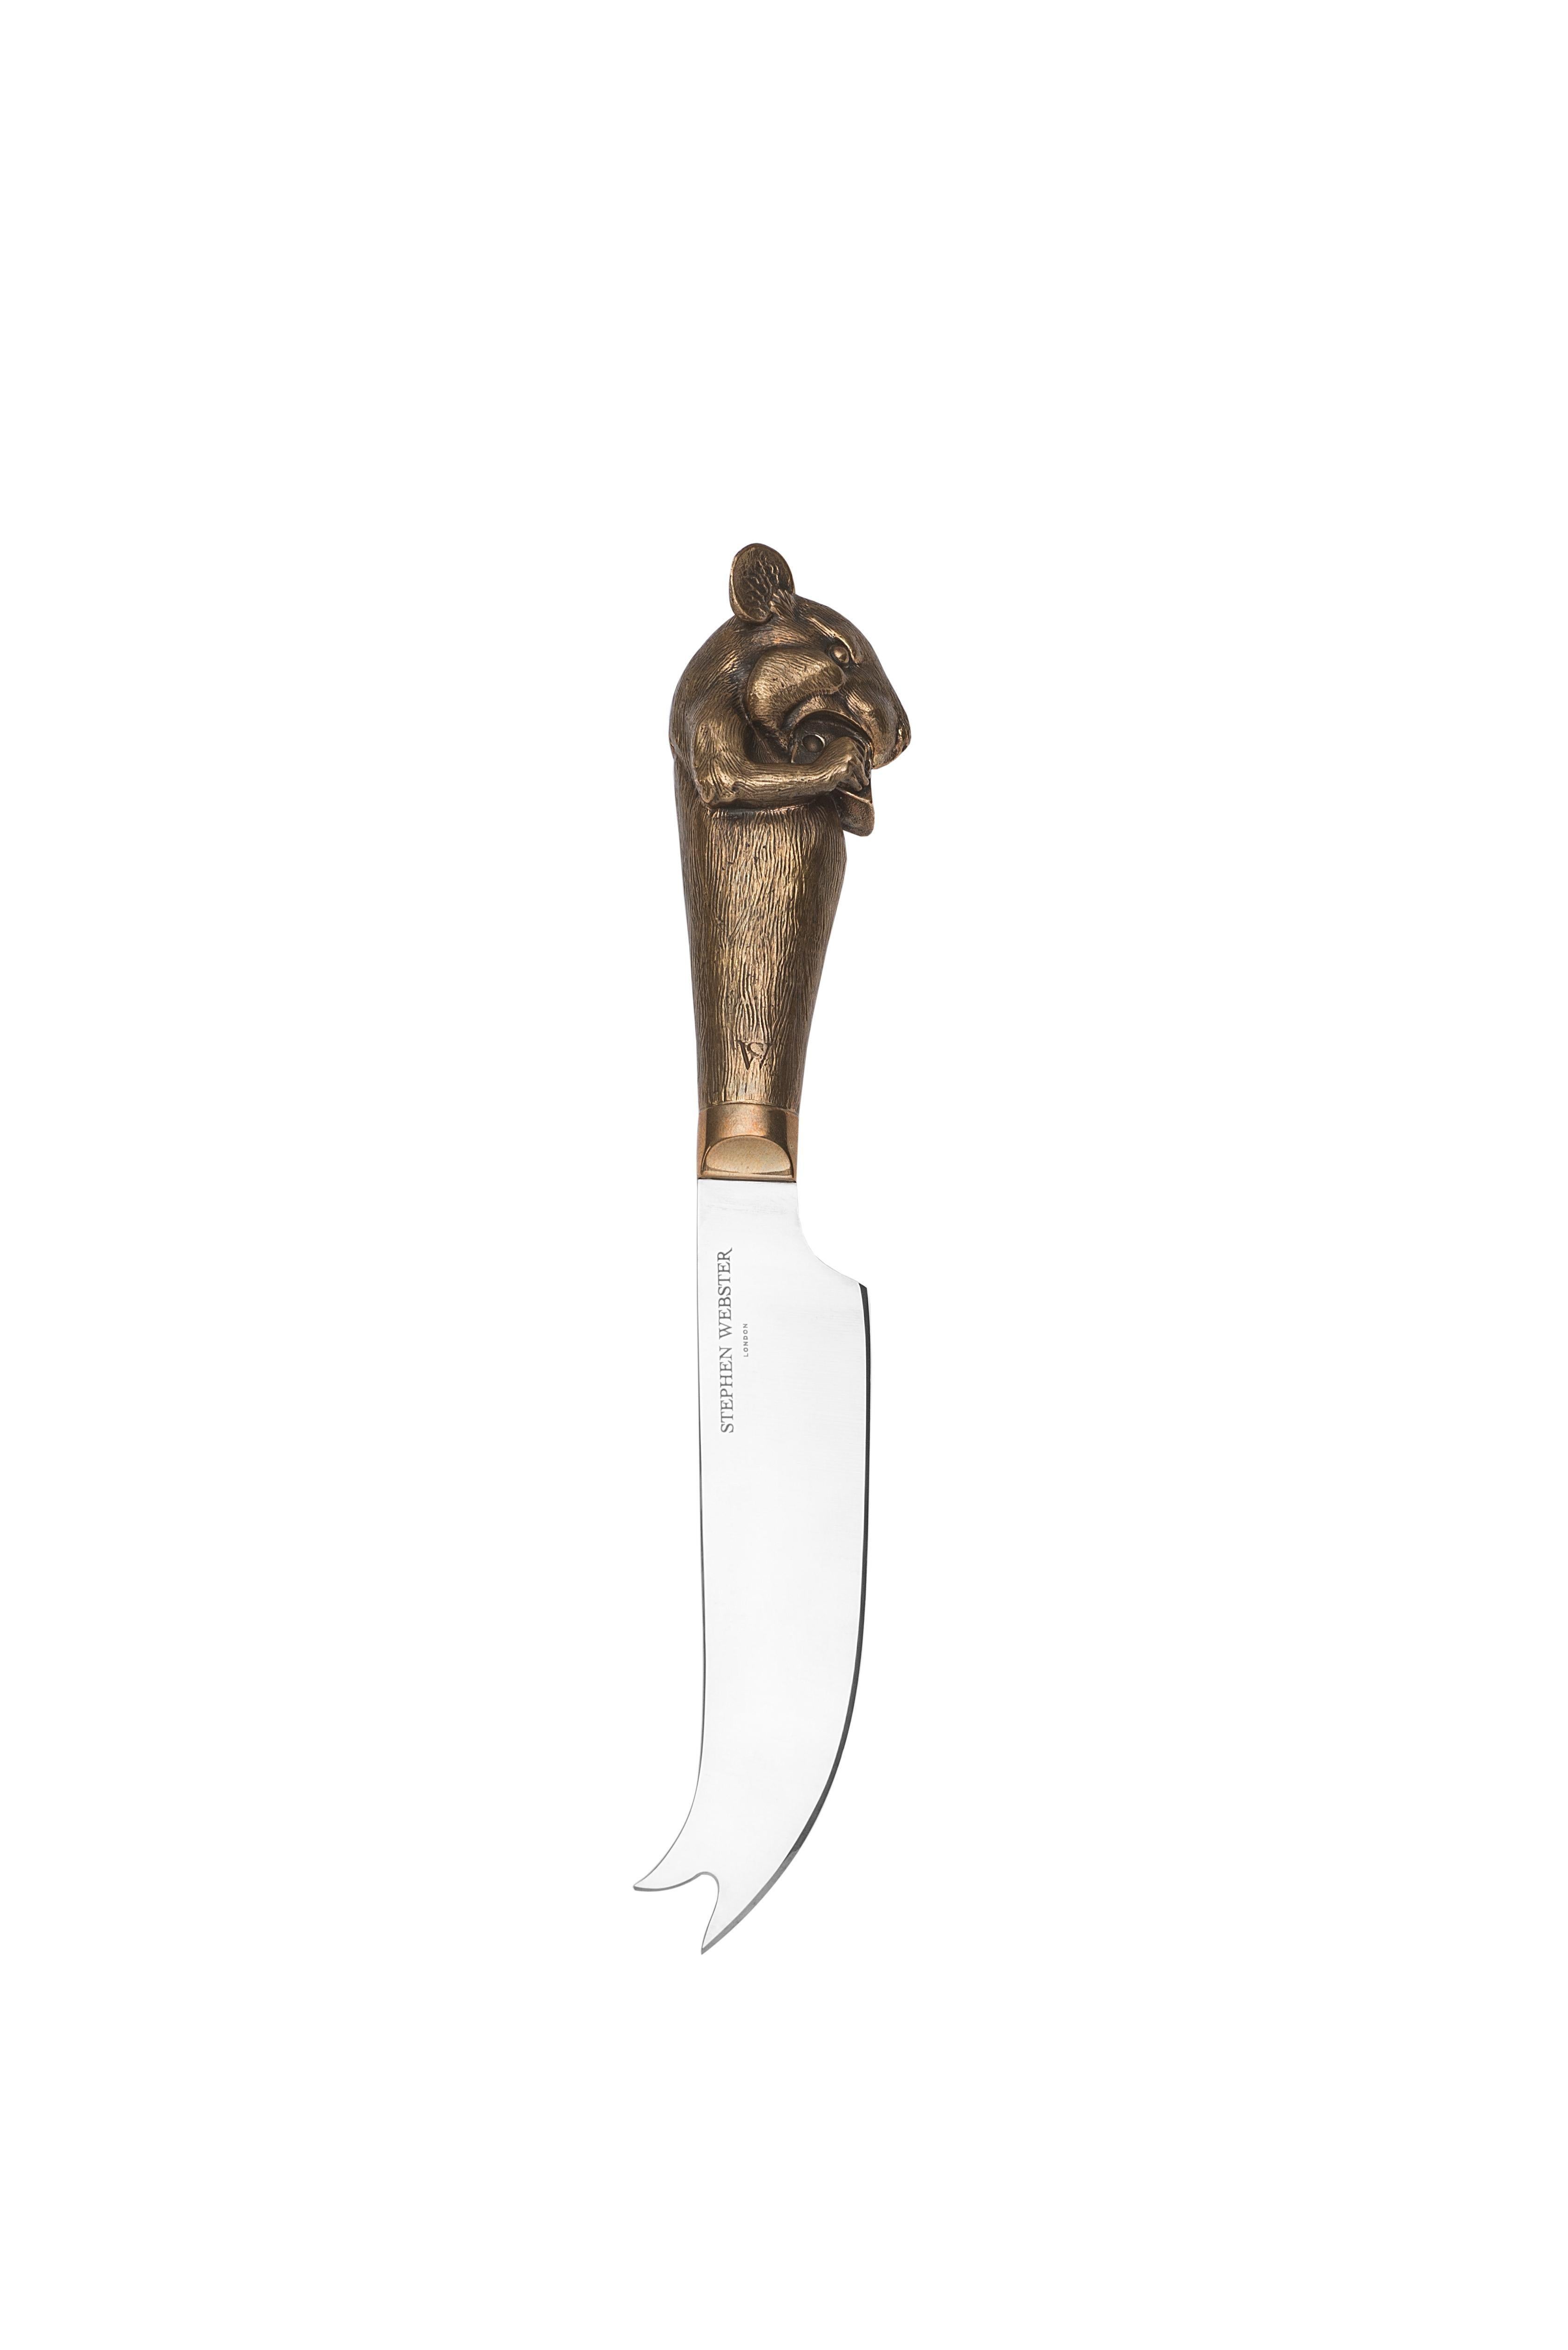 A single bronze beast cheese knife with stainless steel blade and bronze handle featuring a Mouse.

Please enquire for your exclusive price if your delivery country is outside of the United Kingdom.

The luxury ‘Homeware’ collection has grown out of